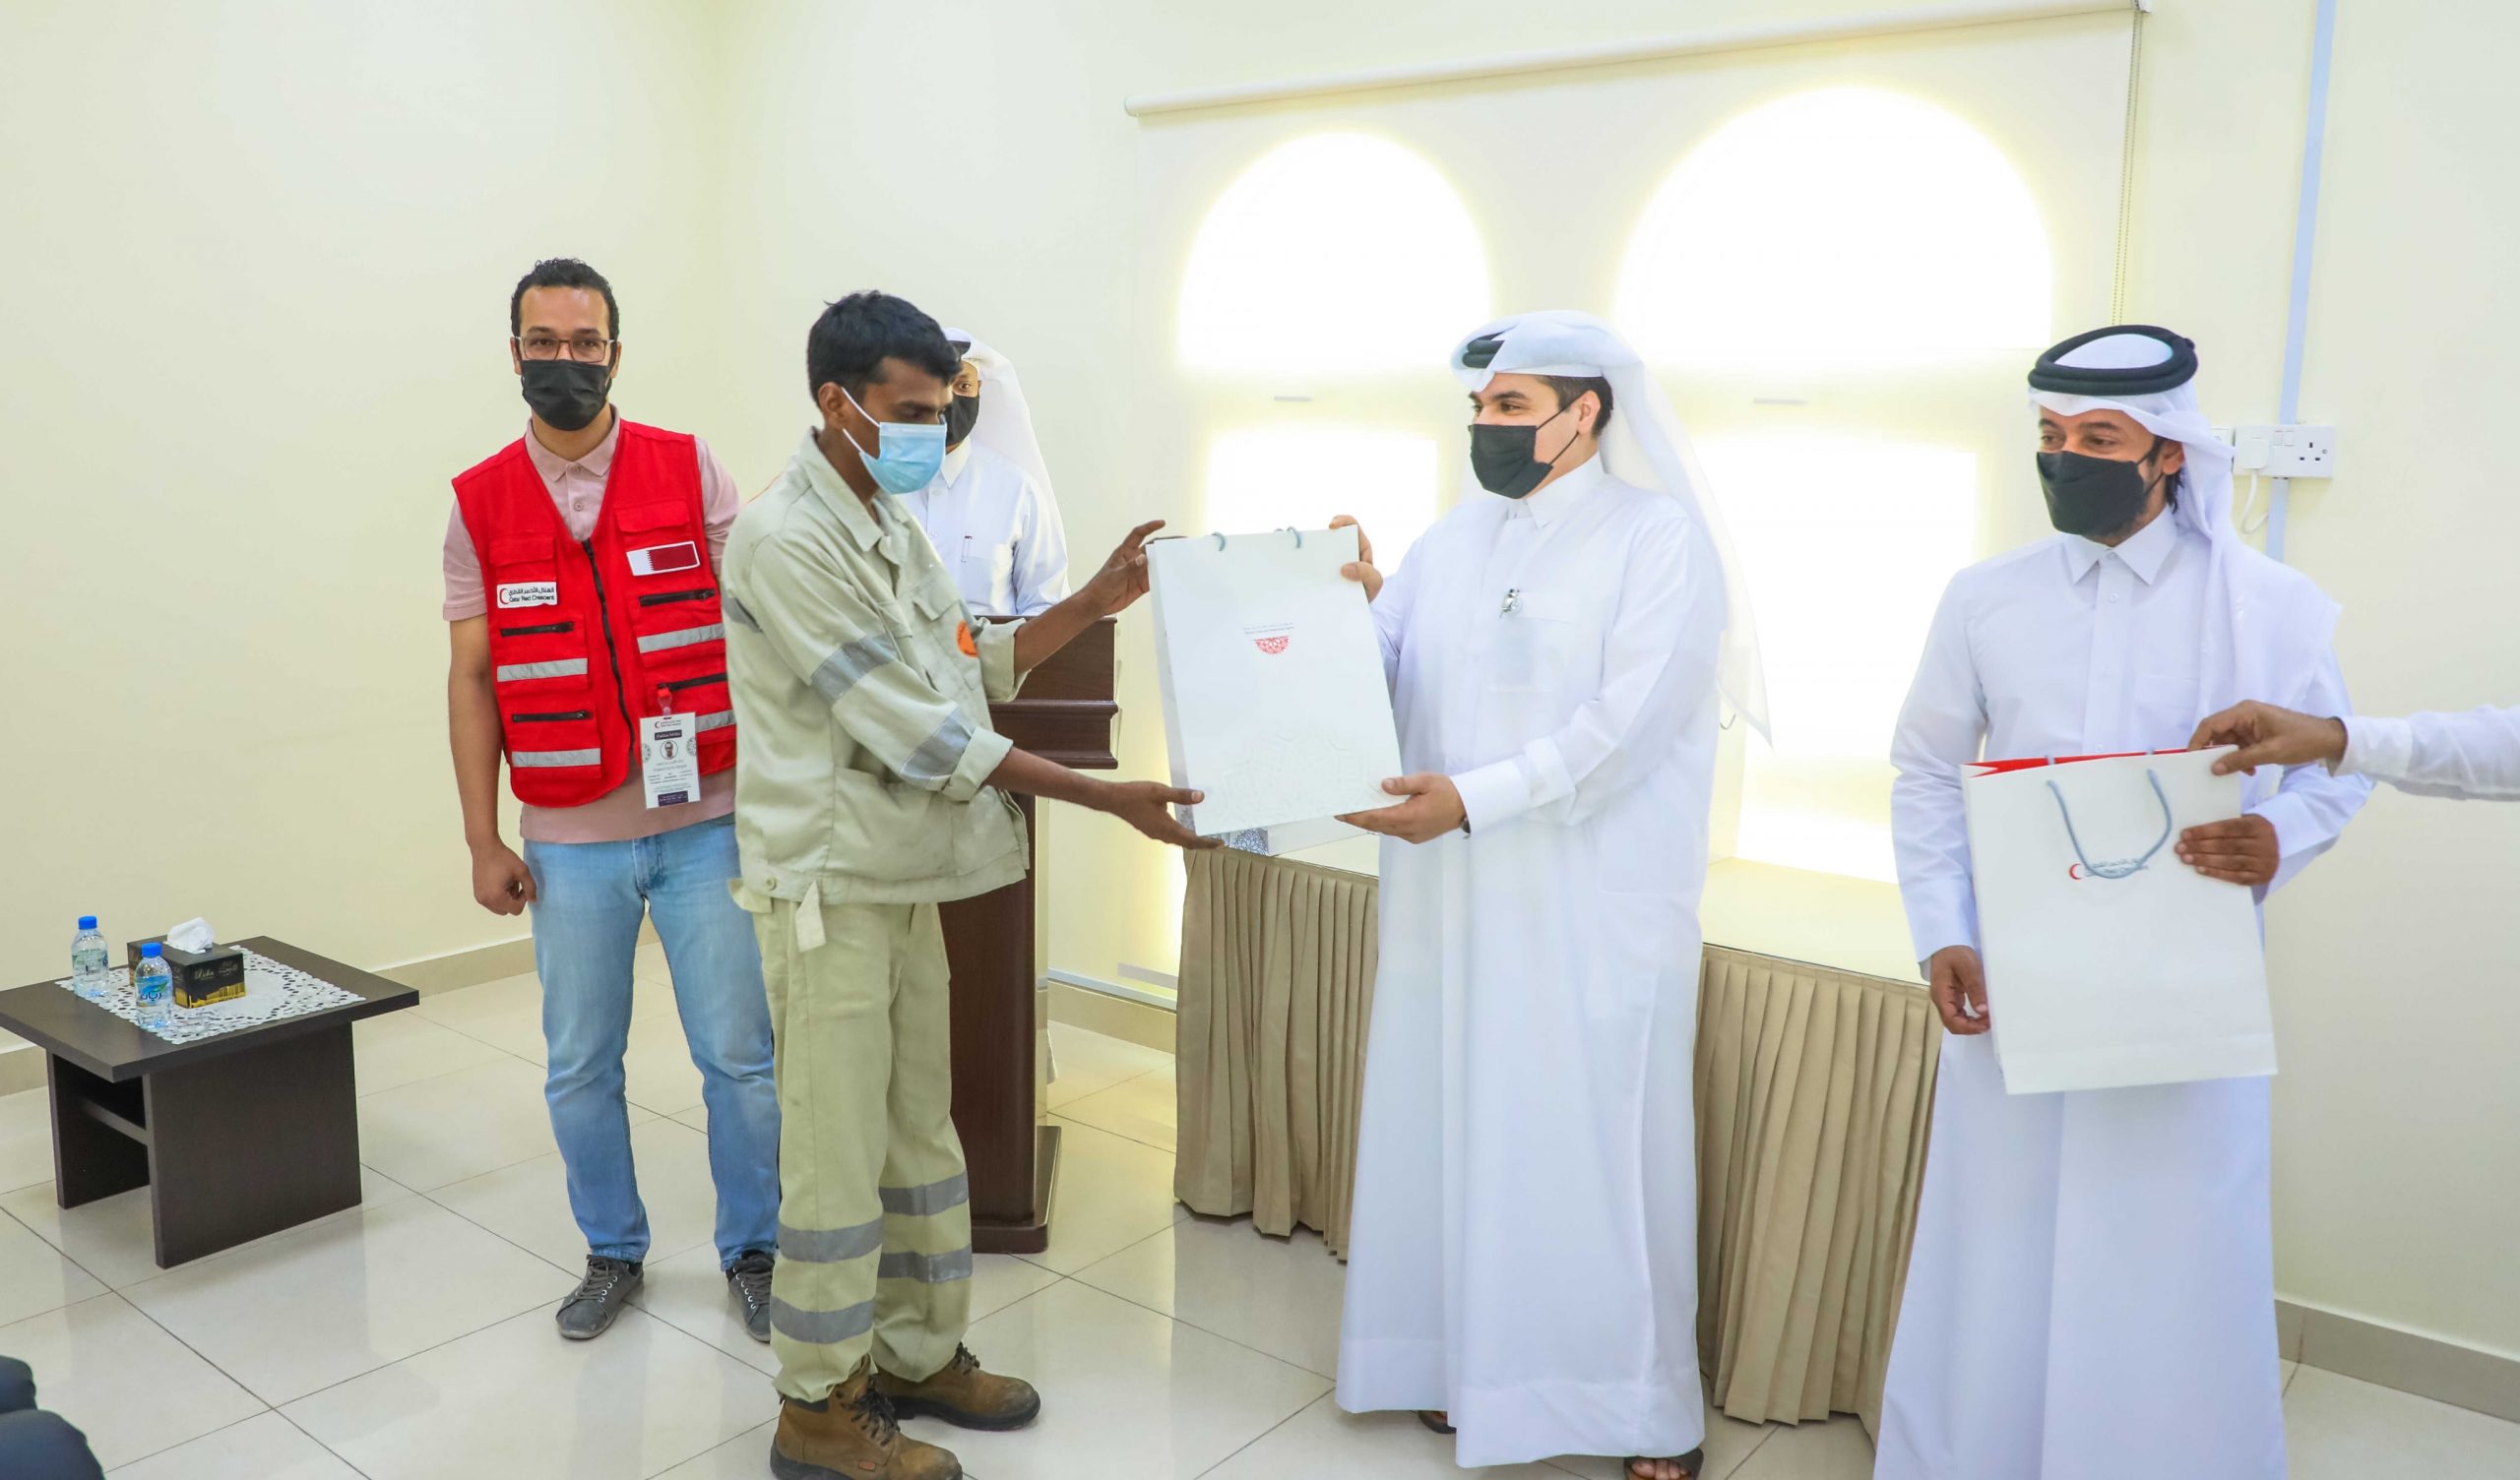 QRCS distributes hygiene kits to 2,000 municipality workers